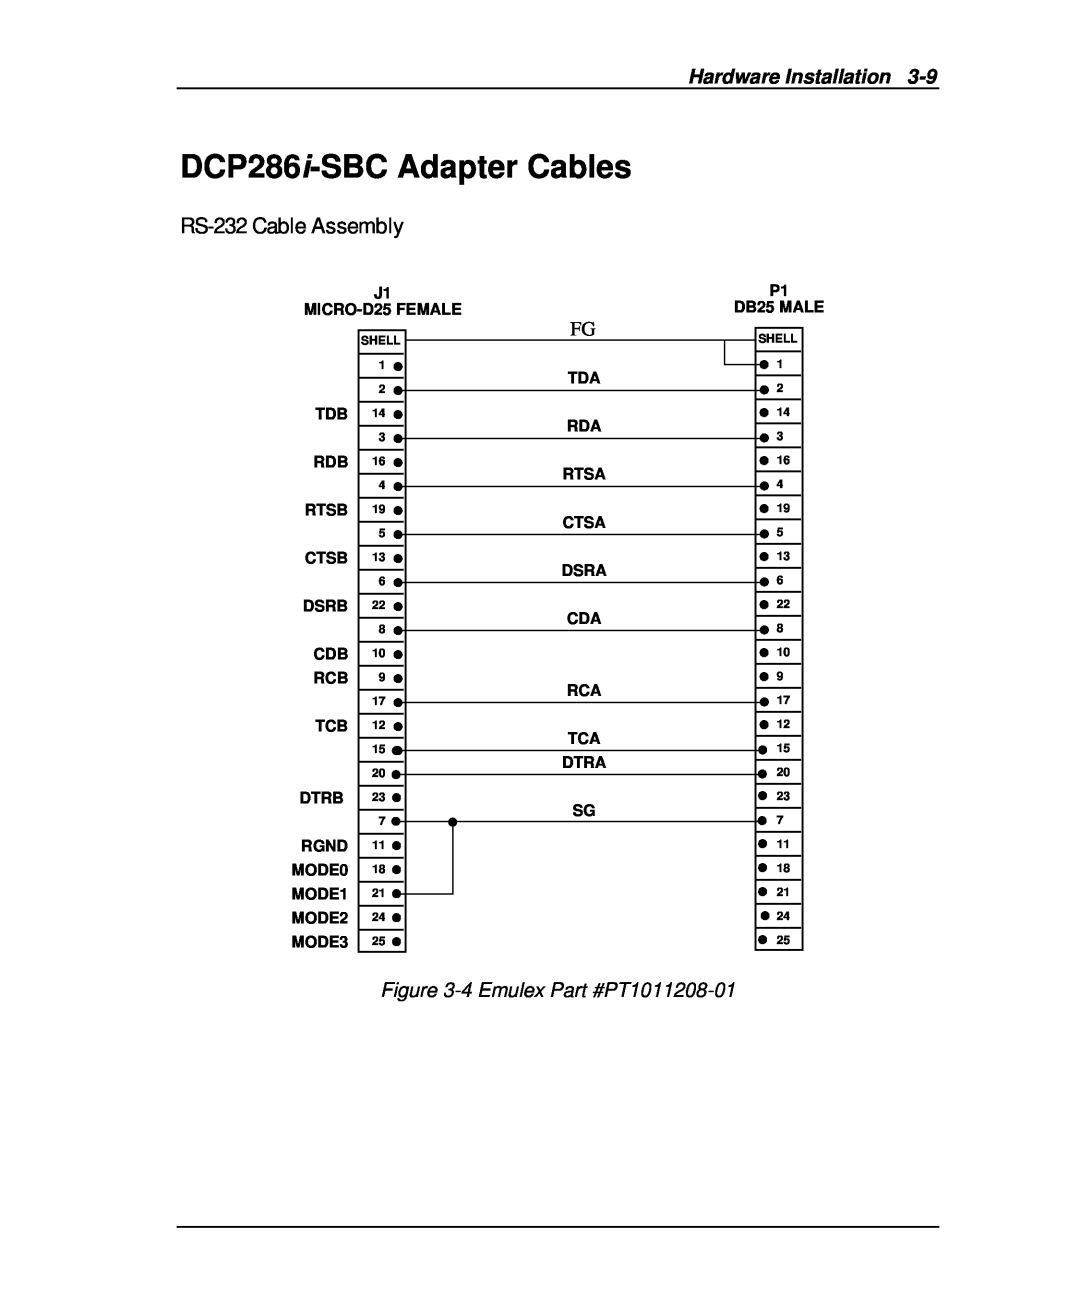 Emulex DCP_link manual DCP286i-SBC Adapter Cables, RS-232 Cable Assembly, Hardware Installation, 4 Emulex PT1011208-01 